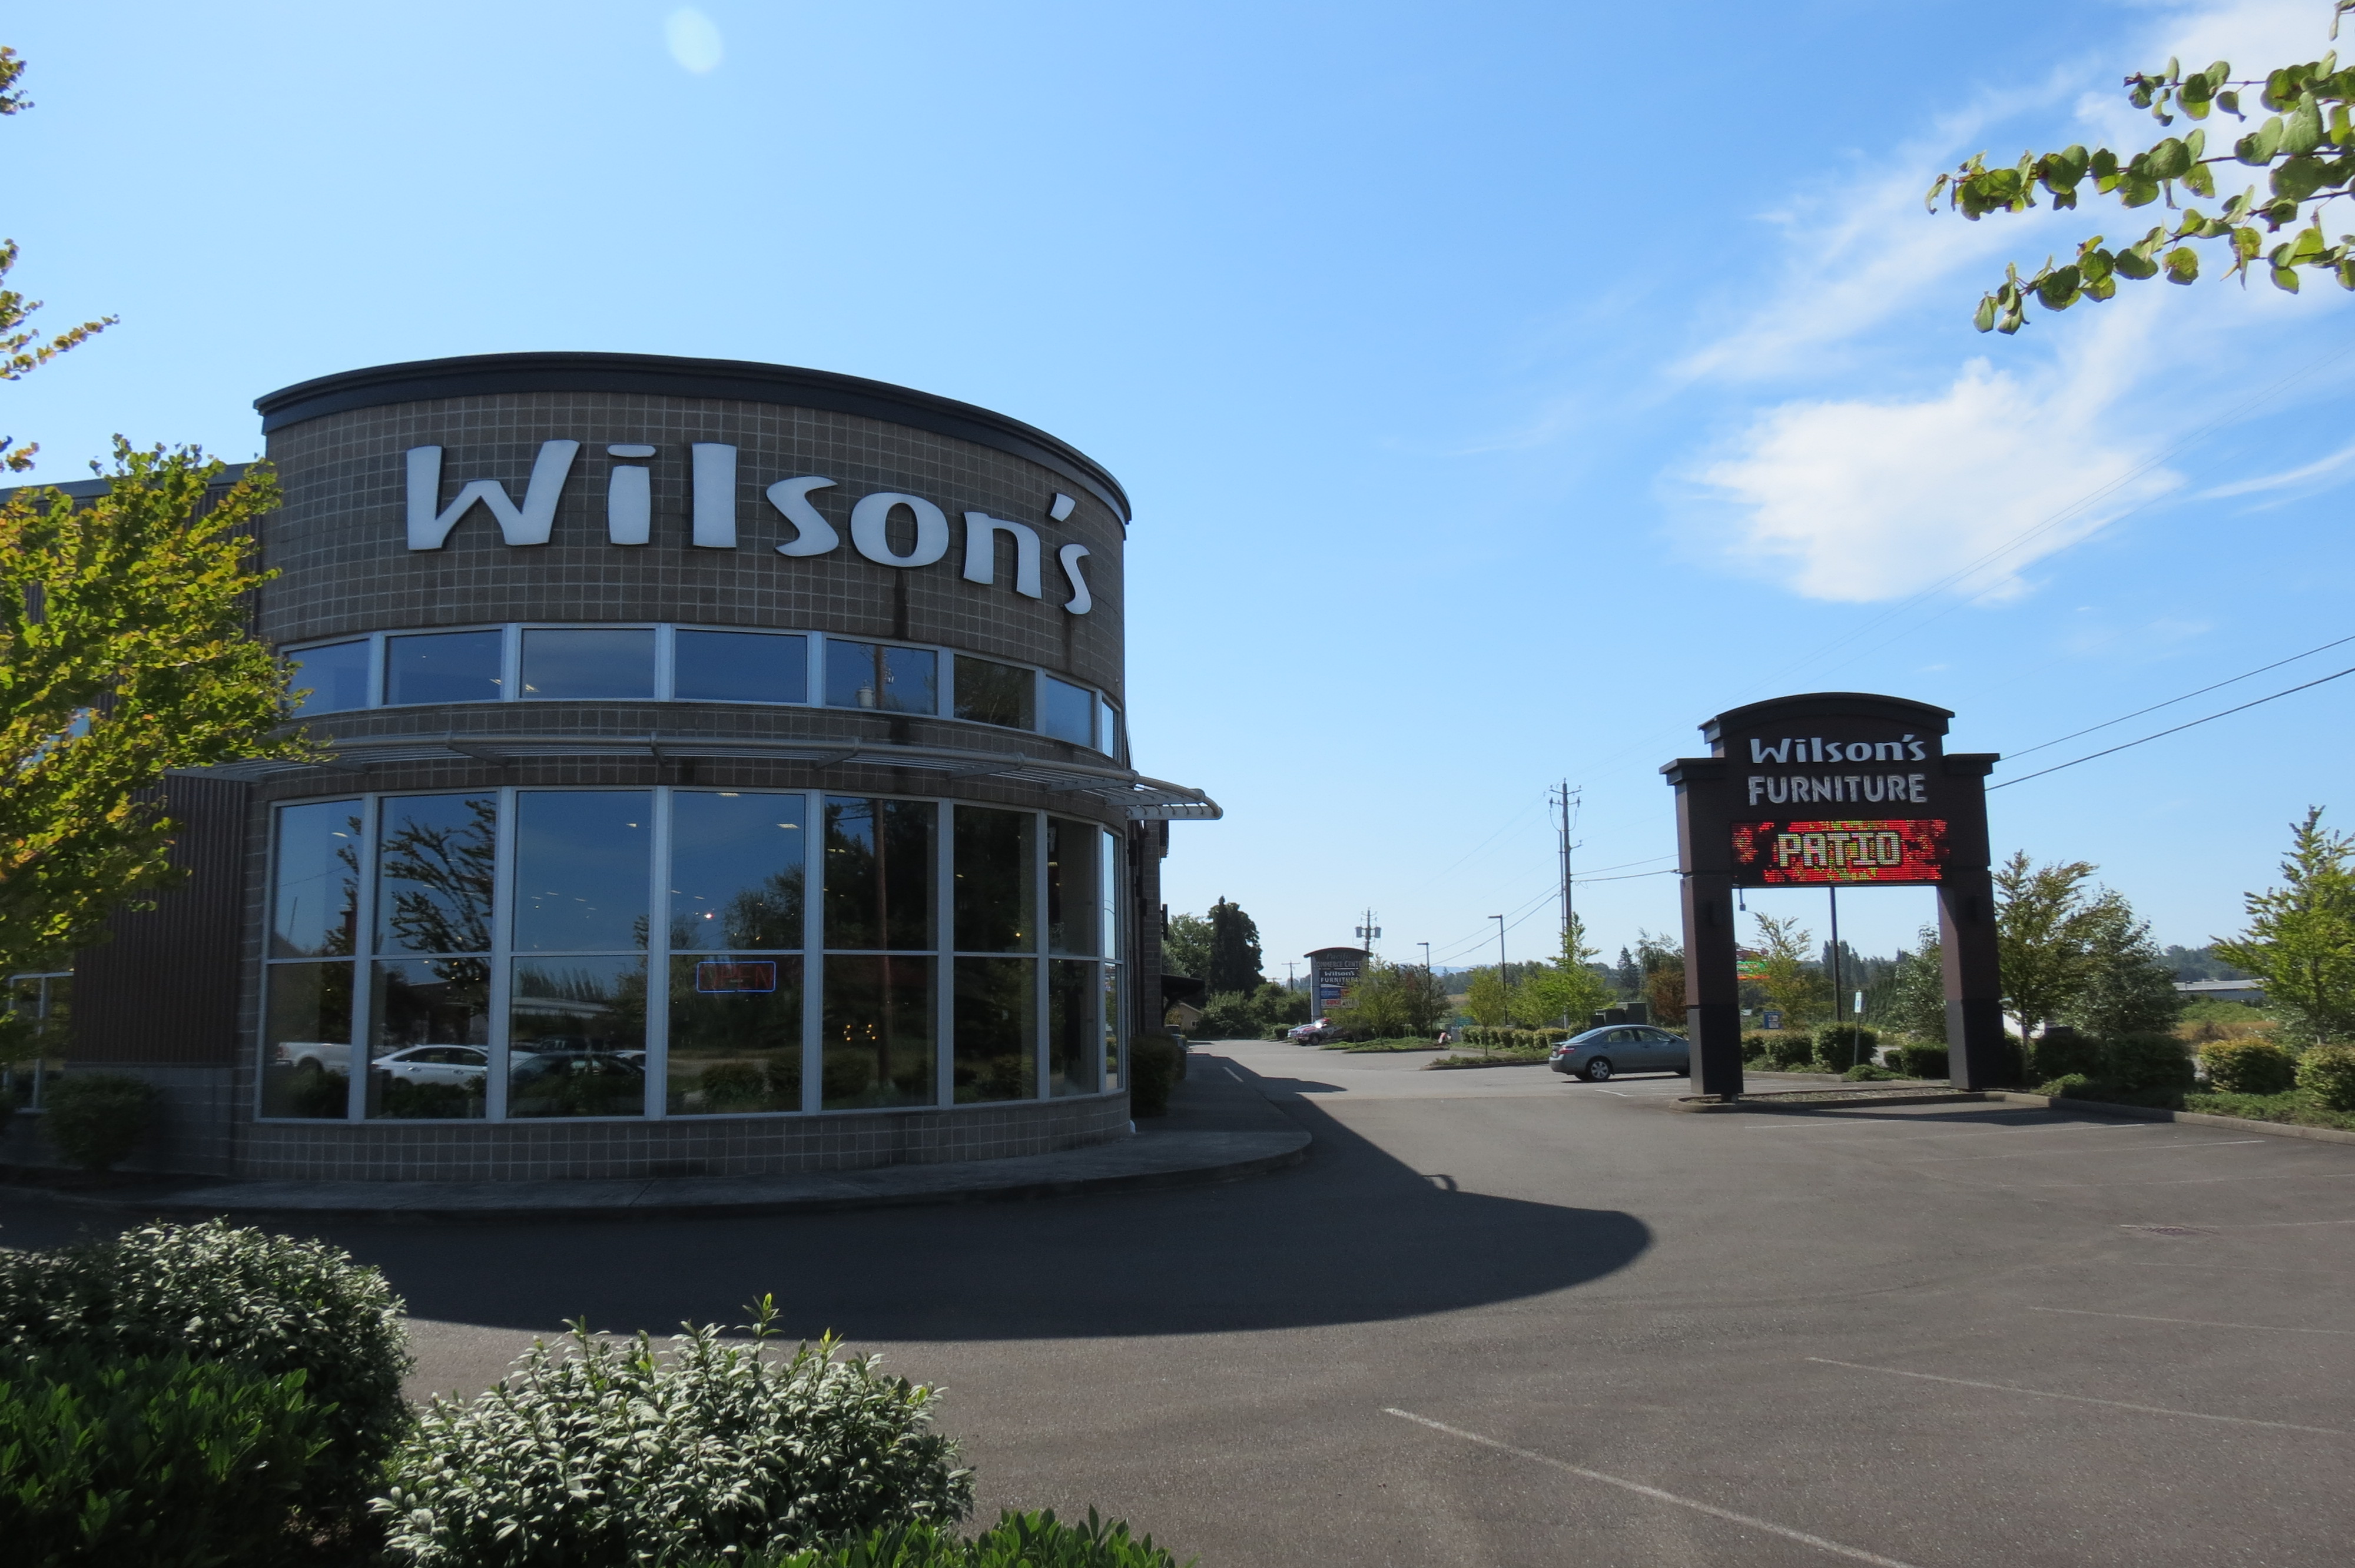 Wilson S Furniture Is Closing Their Outlet Store But Not Their